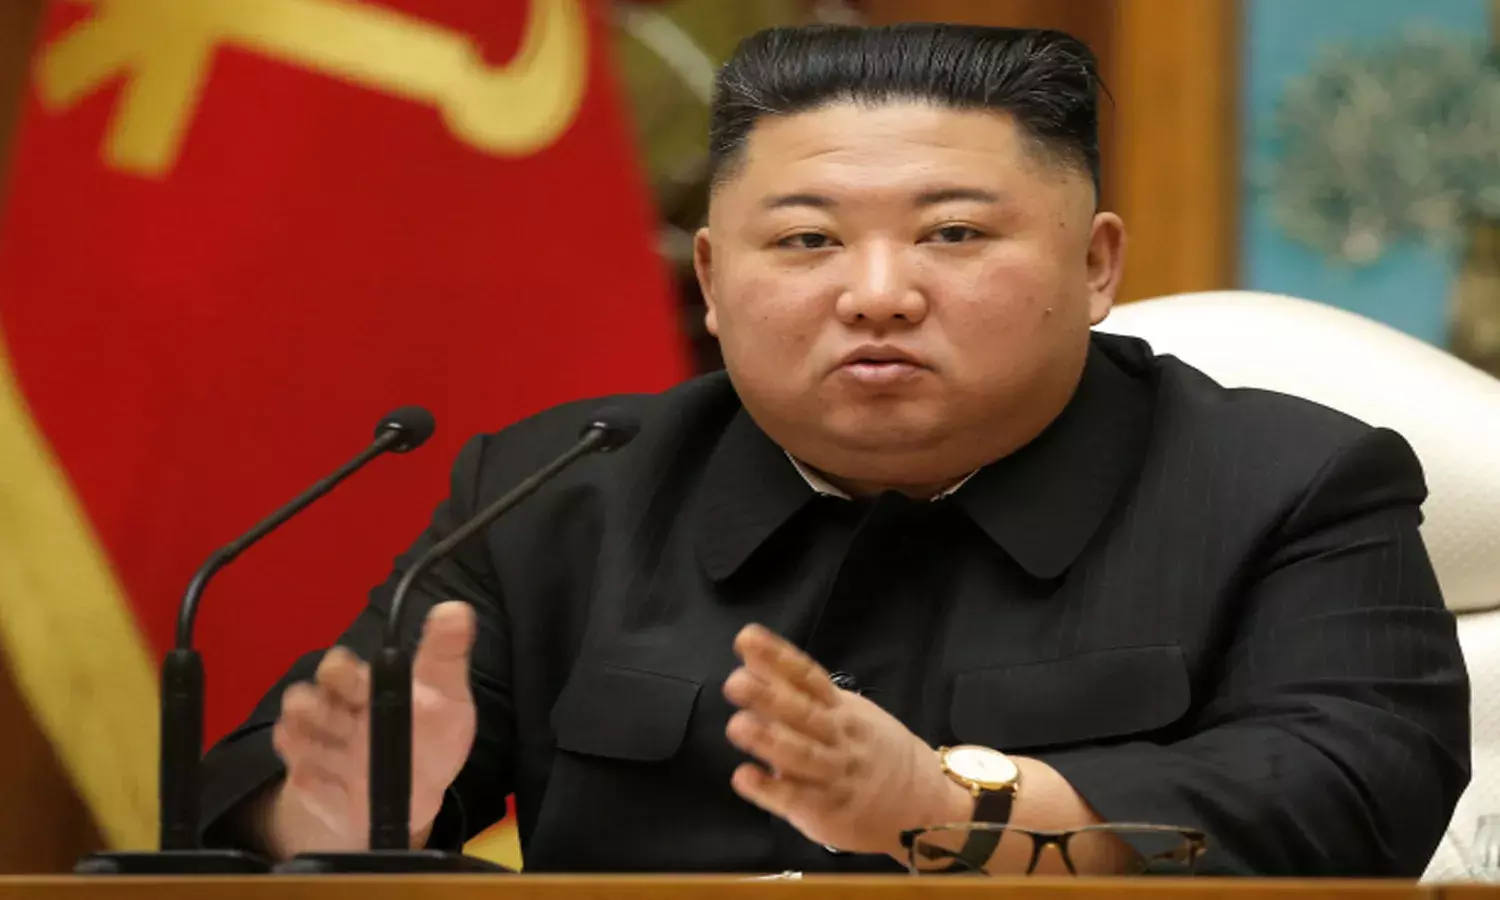 North Korean leader Kim Jong Un attended successful hypersonic missile test